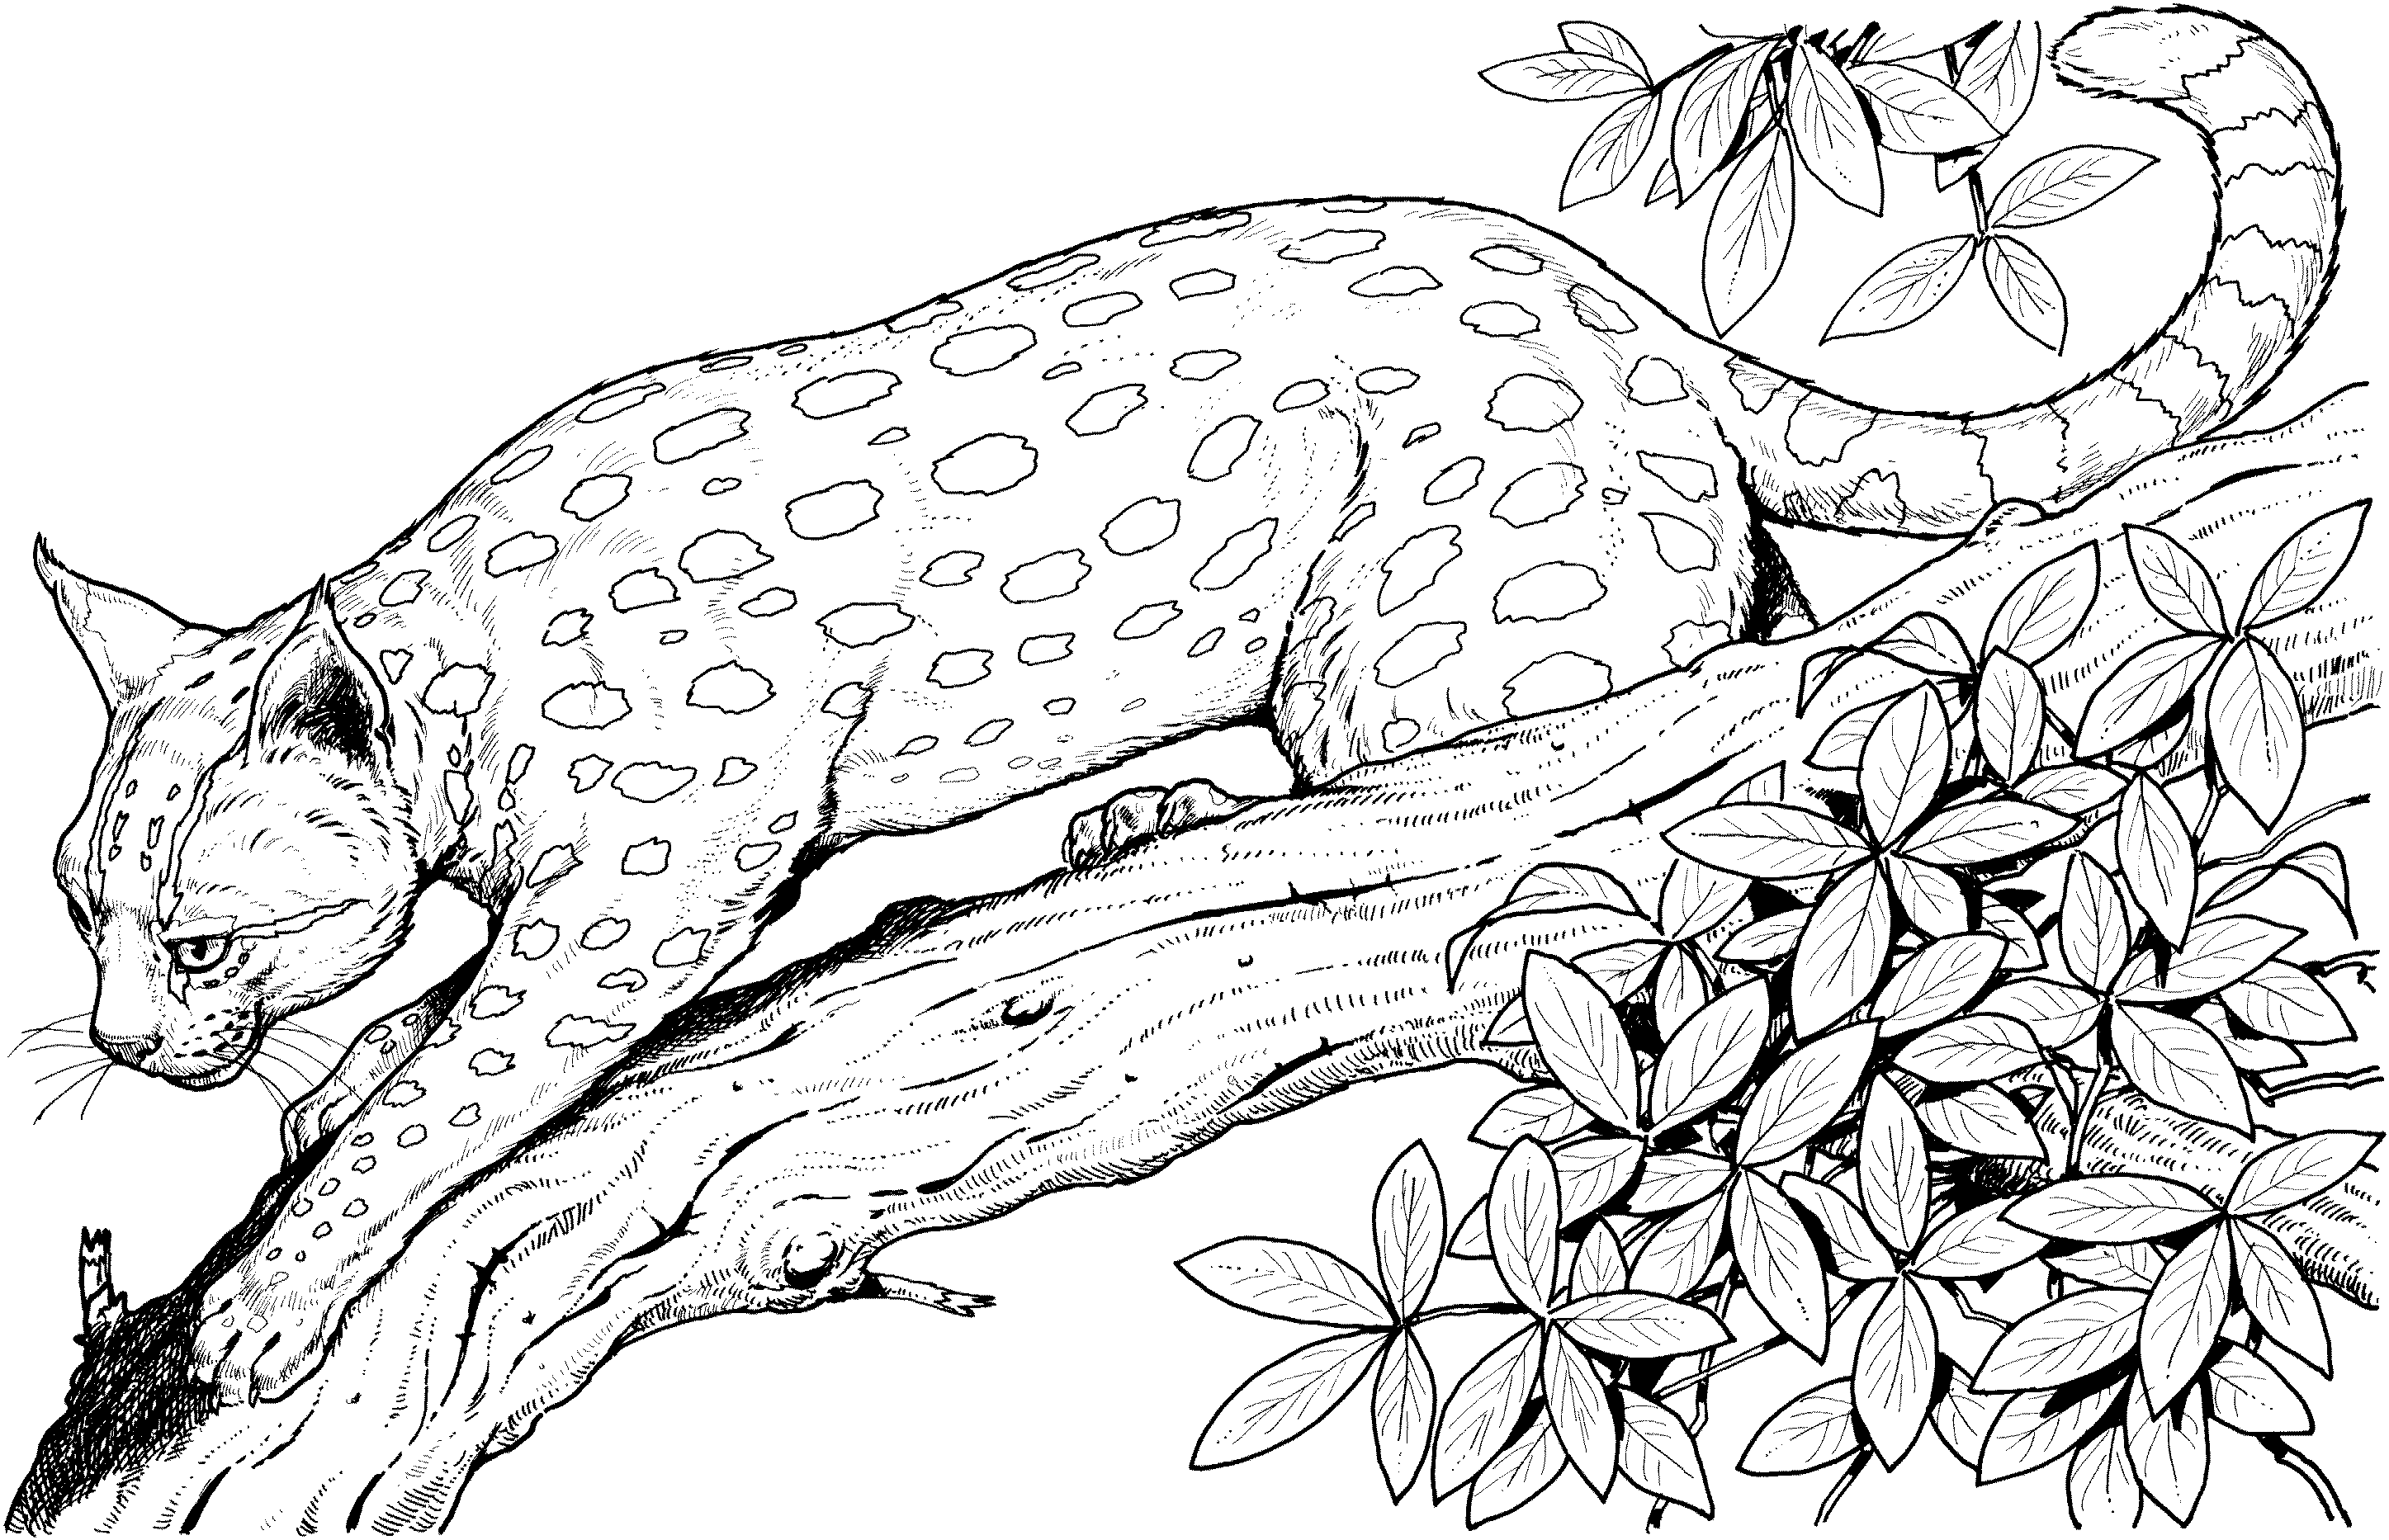 Free Printable Wildlife Coloring Pages